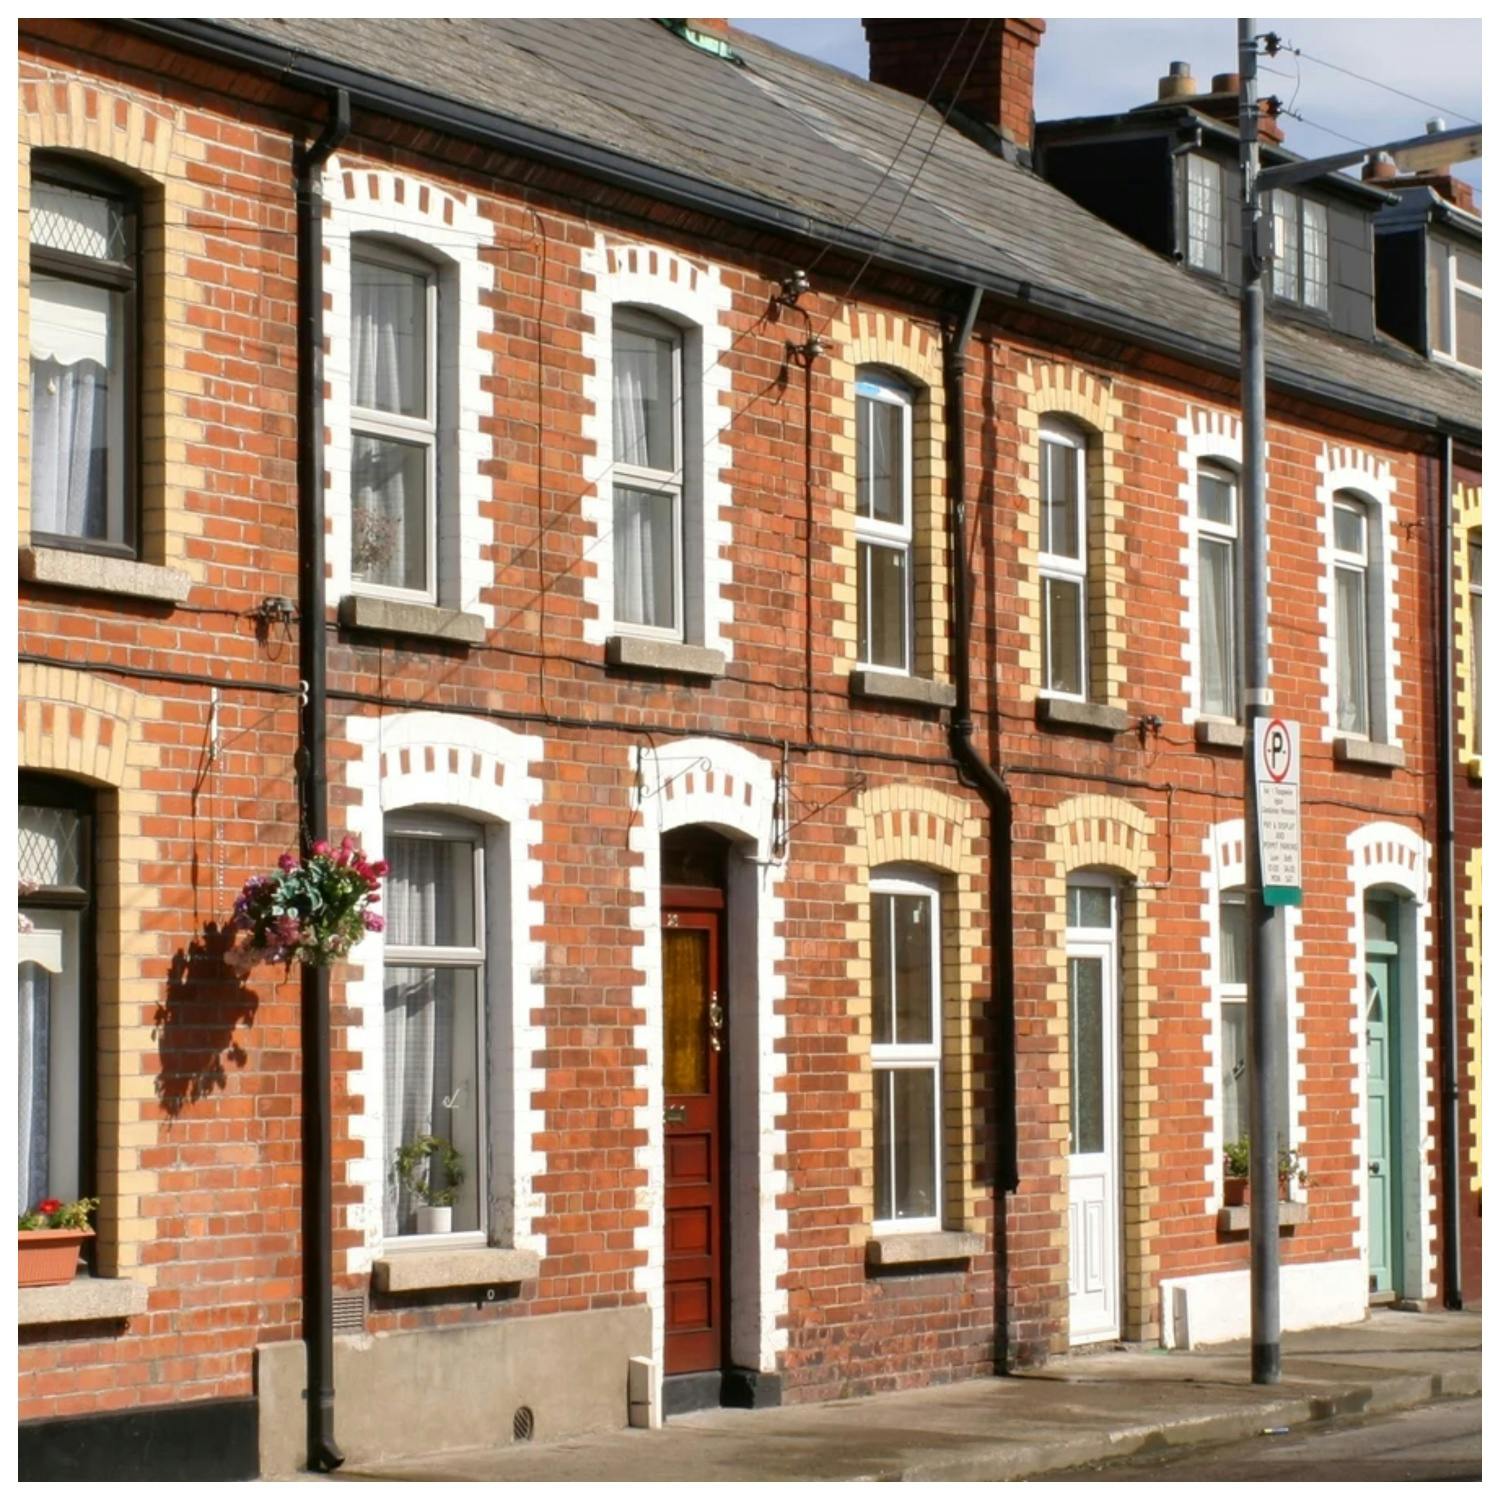 House Prices Continue To Slow Down According To CSO Figures